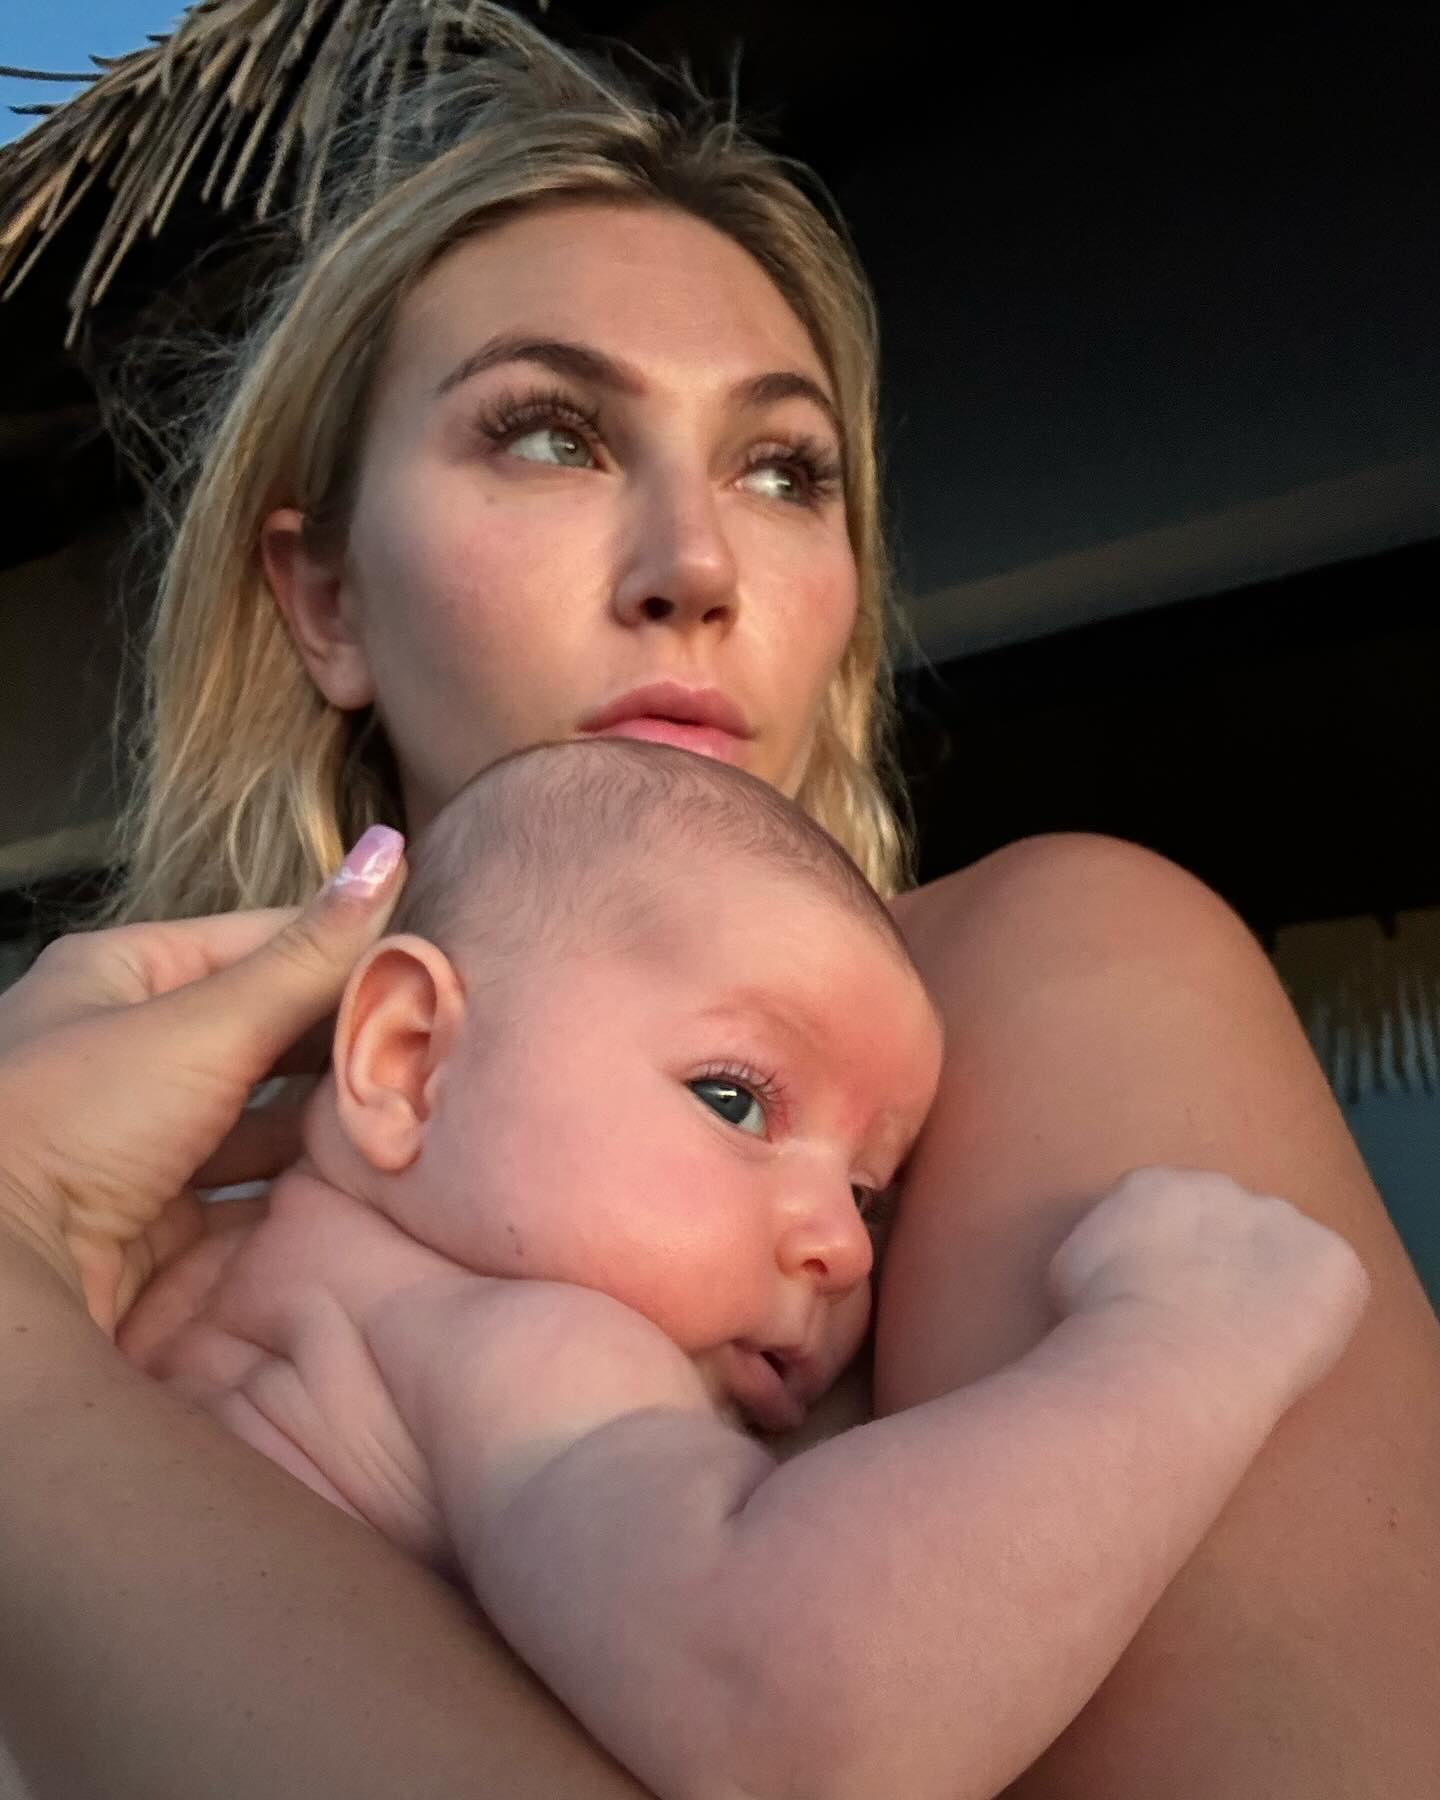 Ocean & I woke up after her 5am feed and watched our first ever sunrise together… she’s becoming so alert & aware it’s insane. My heart couldn’t be more full. 🥹🌞🌅🫶🏼

She makes me feel so whole and complete she’s everything I’ve ever wanted and when I hold her nothing else matters 🤍

The biggest gift on earth is being your mama 🫶🏼